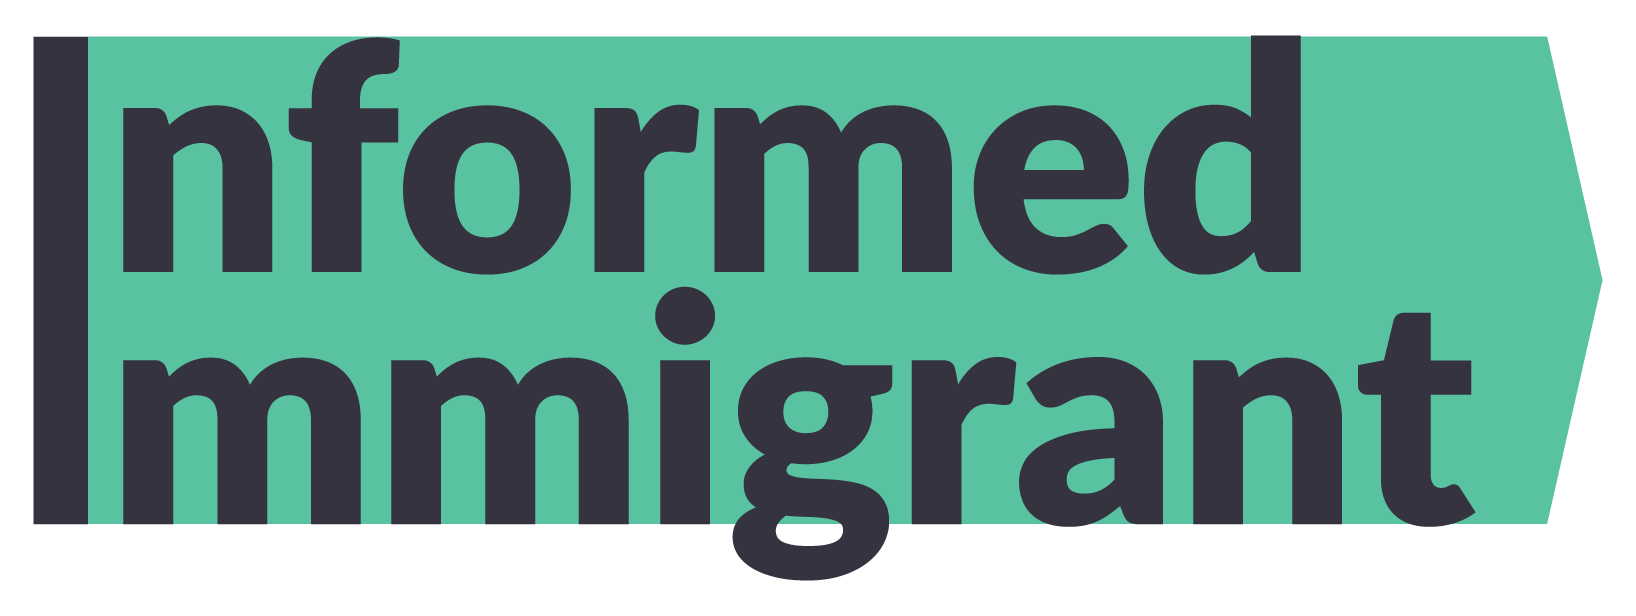 Informed Immigrant